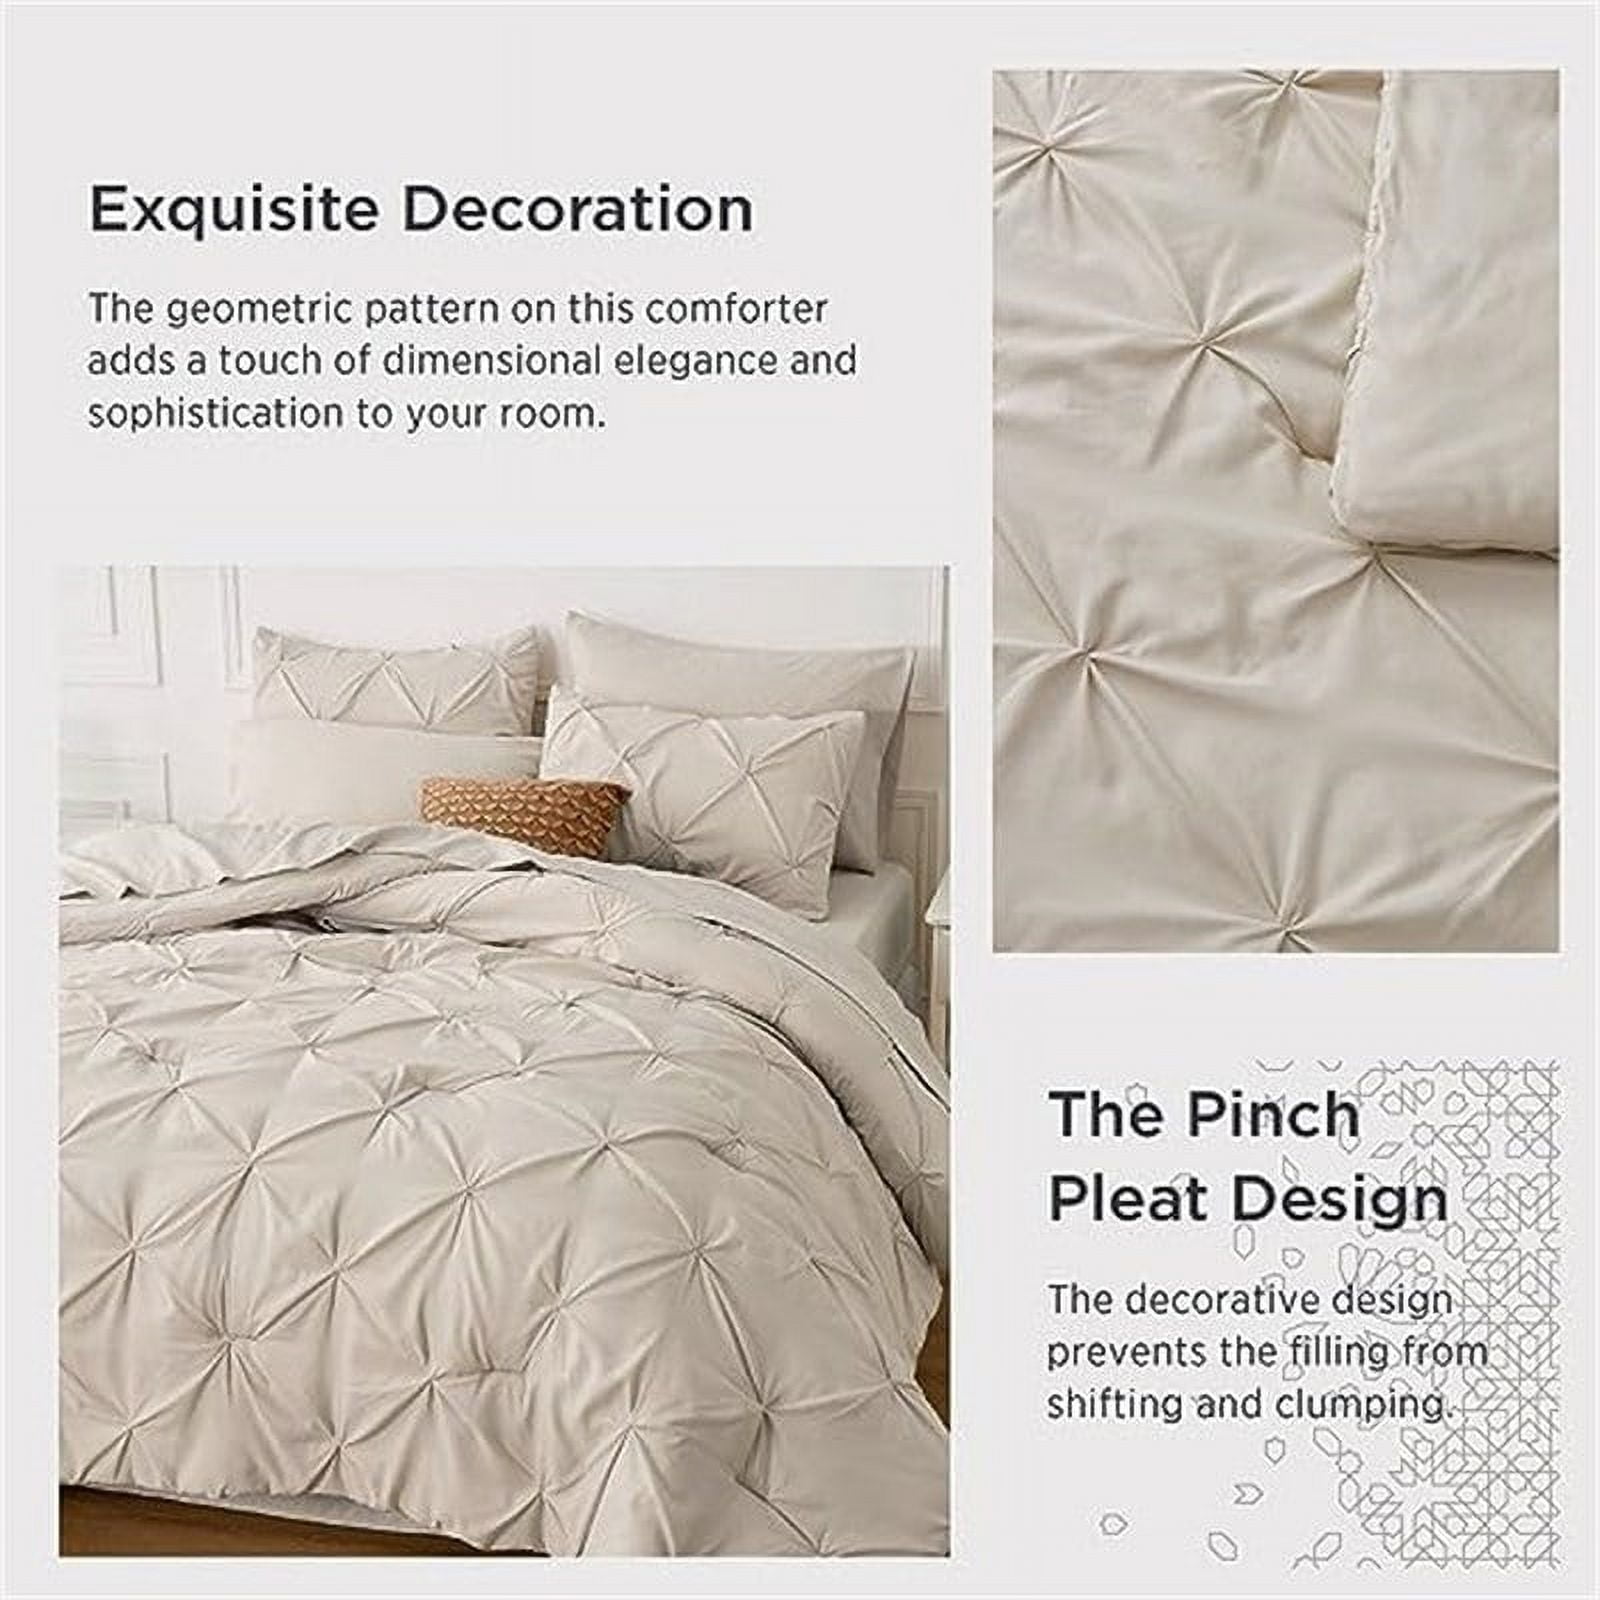 Rustic, Floral Comforters and Sets - Bed Bath & Beyond